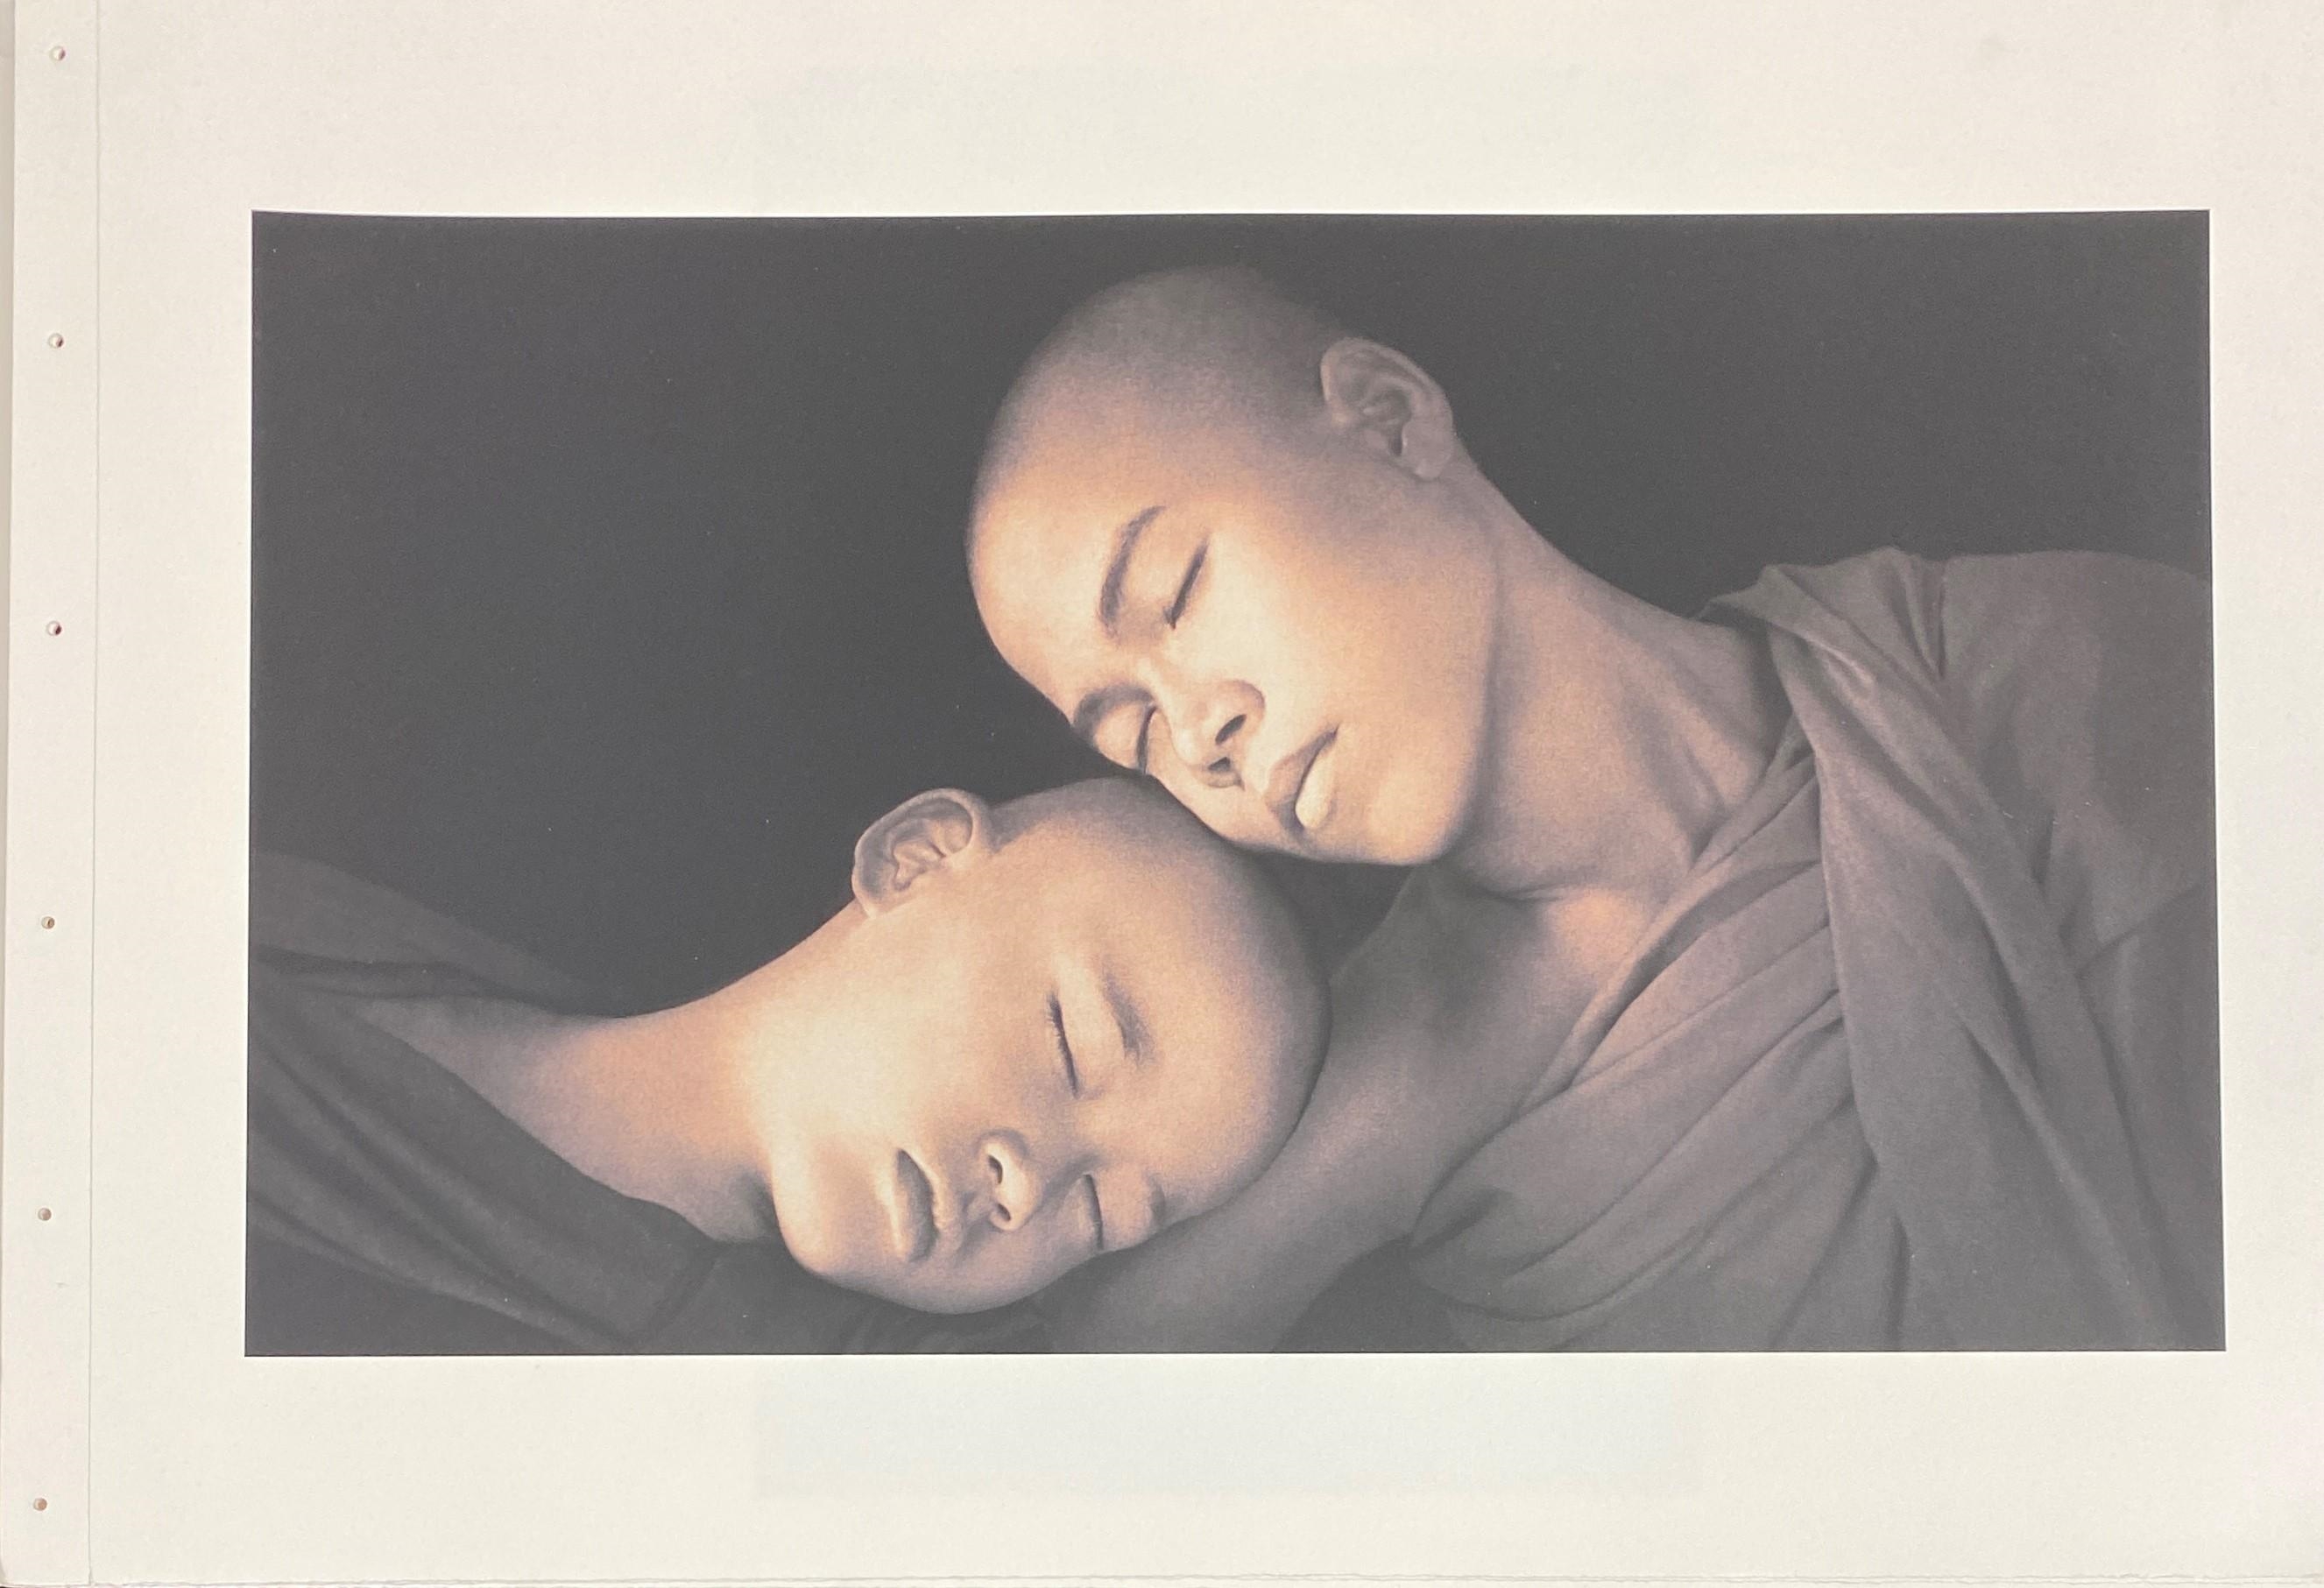 Artwork by Gregory Colbert, Ashes & Snow, Selected Works, Made of sepia photolithographs